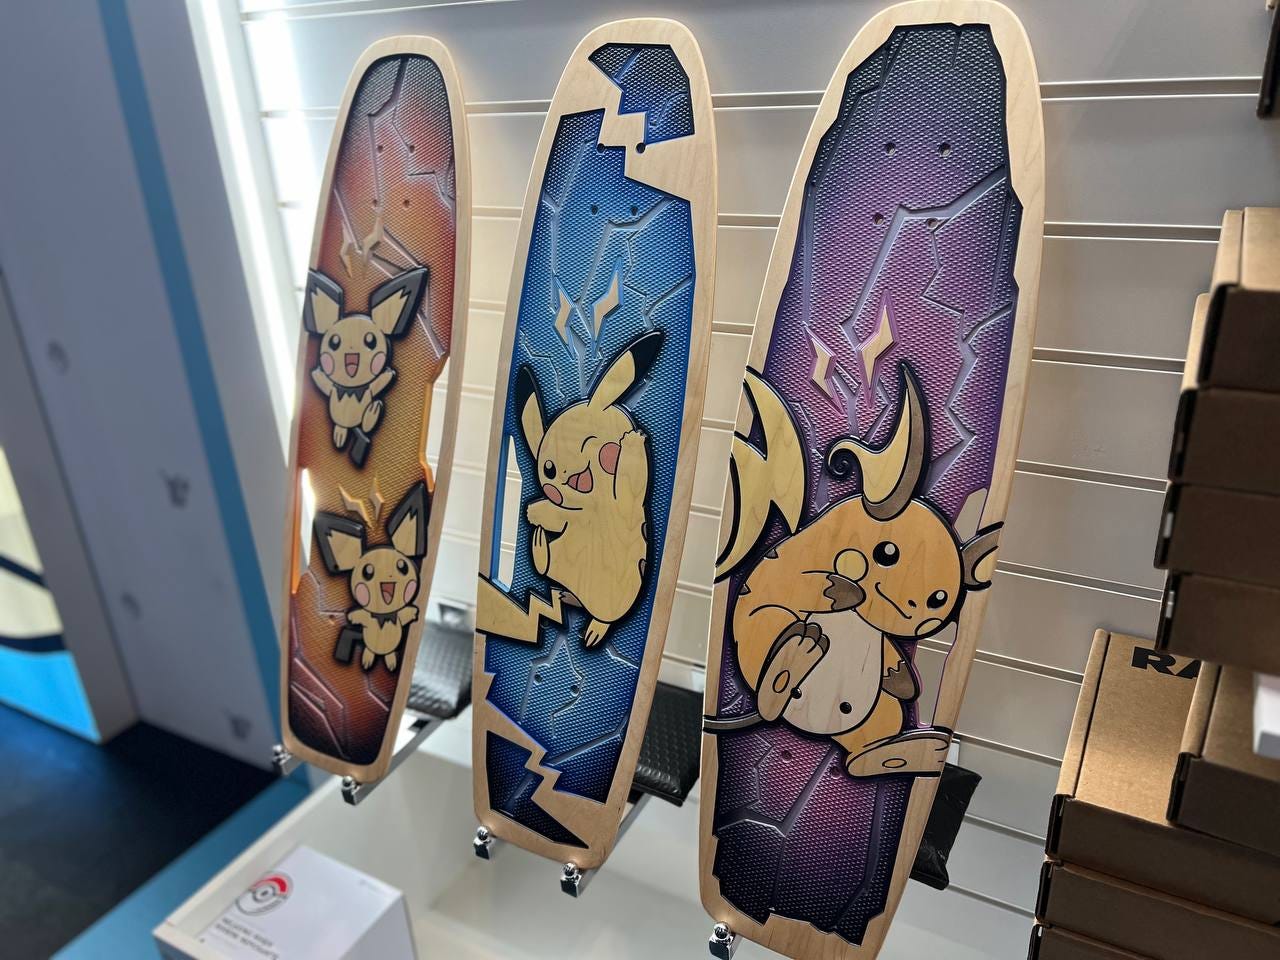 Surf Boards available from the Pokémon Center pop-up store